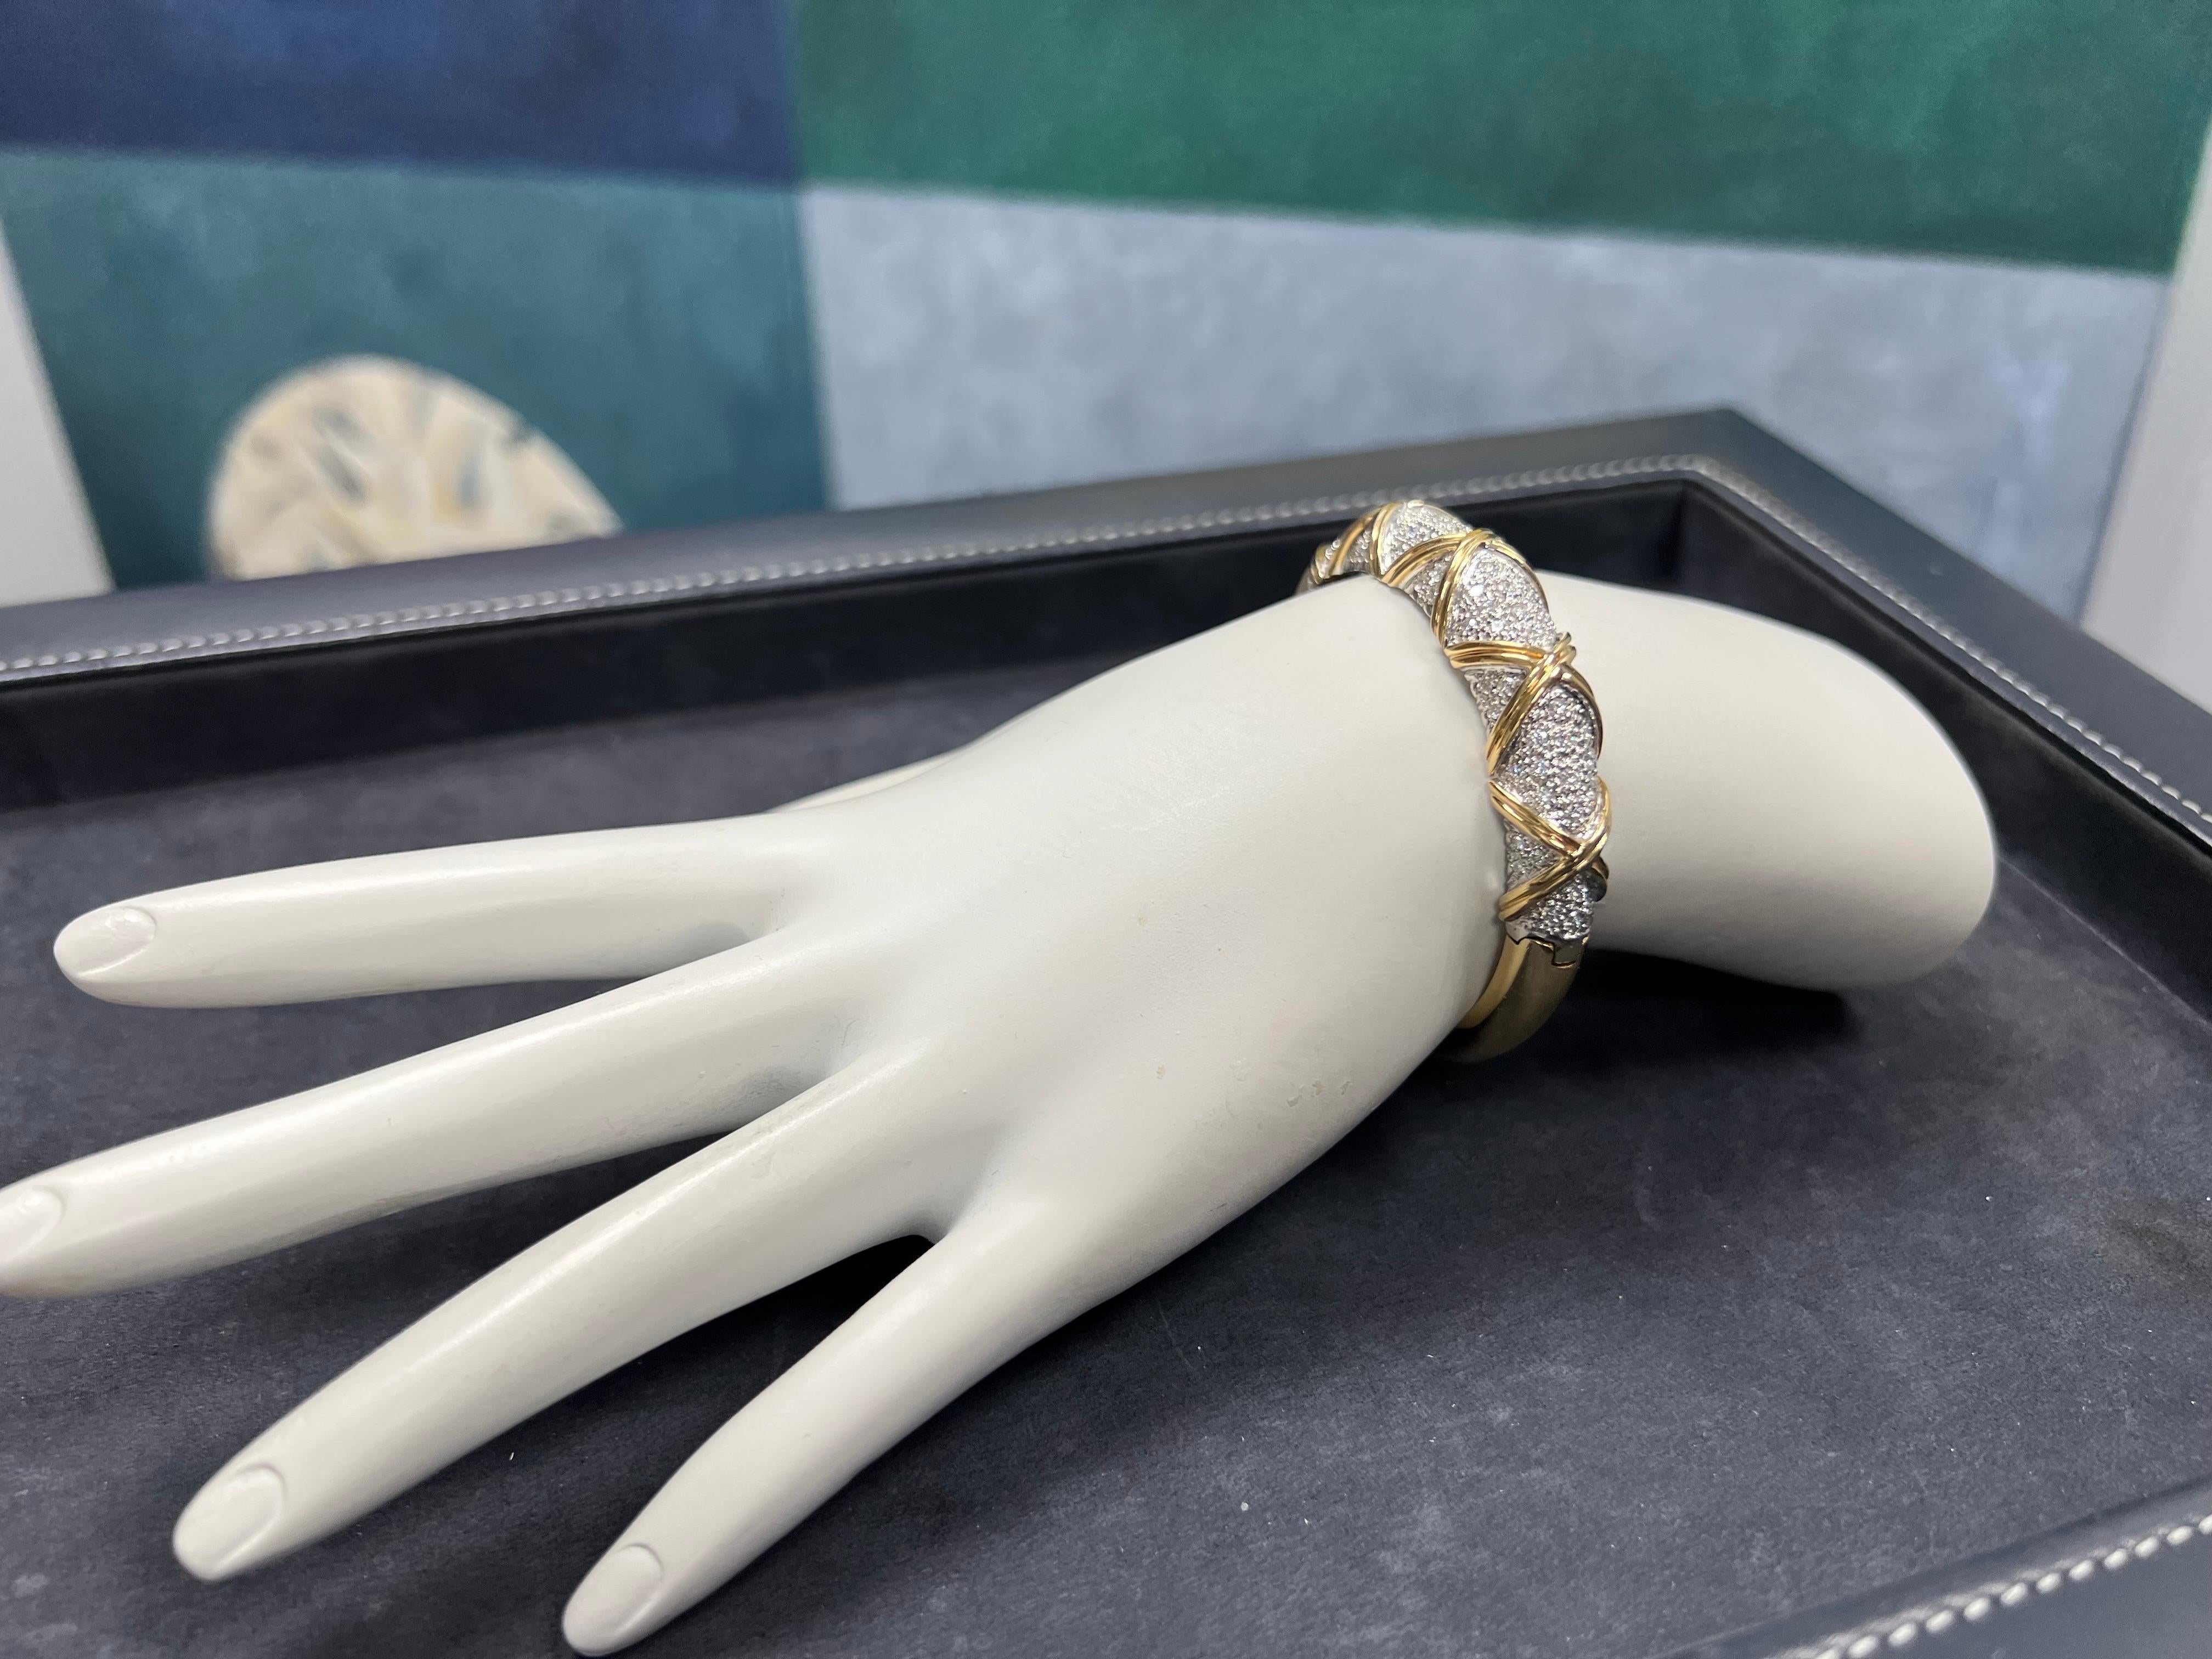 
A magnificent 2.50 Carat Natural Round Brilliant colorless diamond bangle. The piece is mounted in 18k Yellow Gold and is set with 104 round brilliant diamonds, approximately E-F in color and VS-VVS in clarity. 

The piece weighs 35.8 grams total